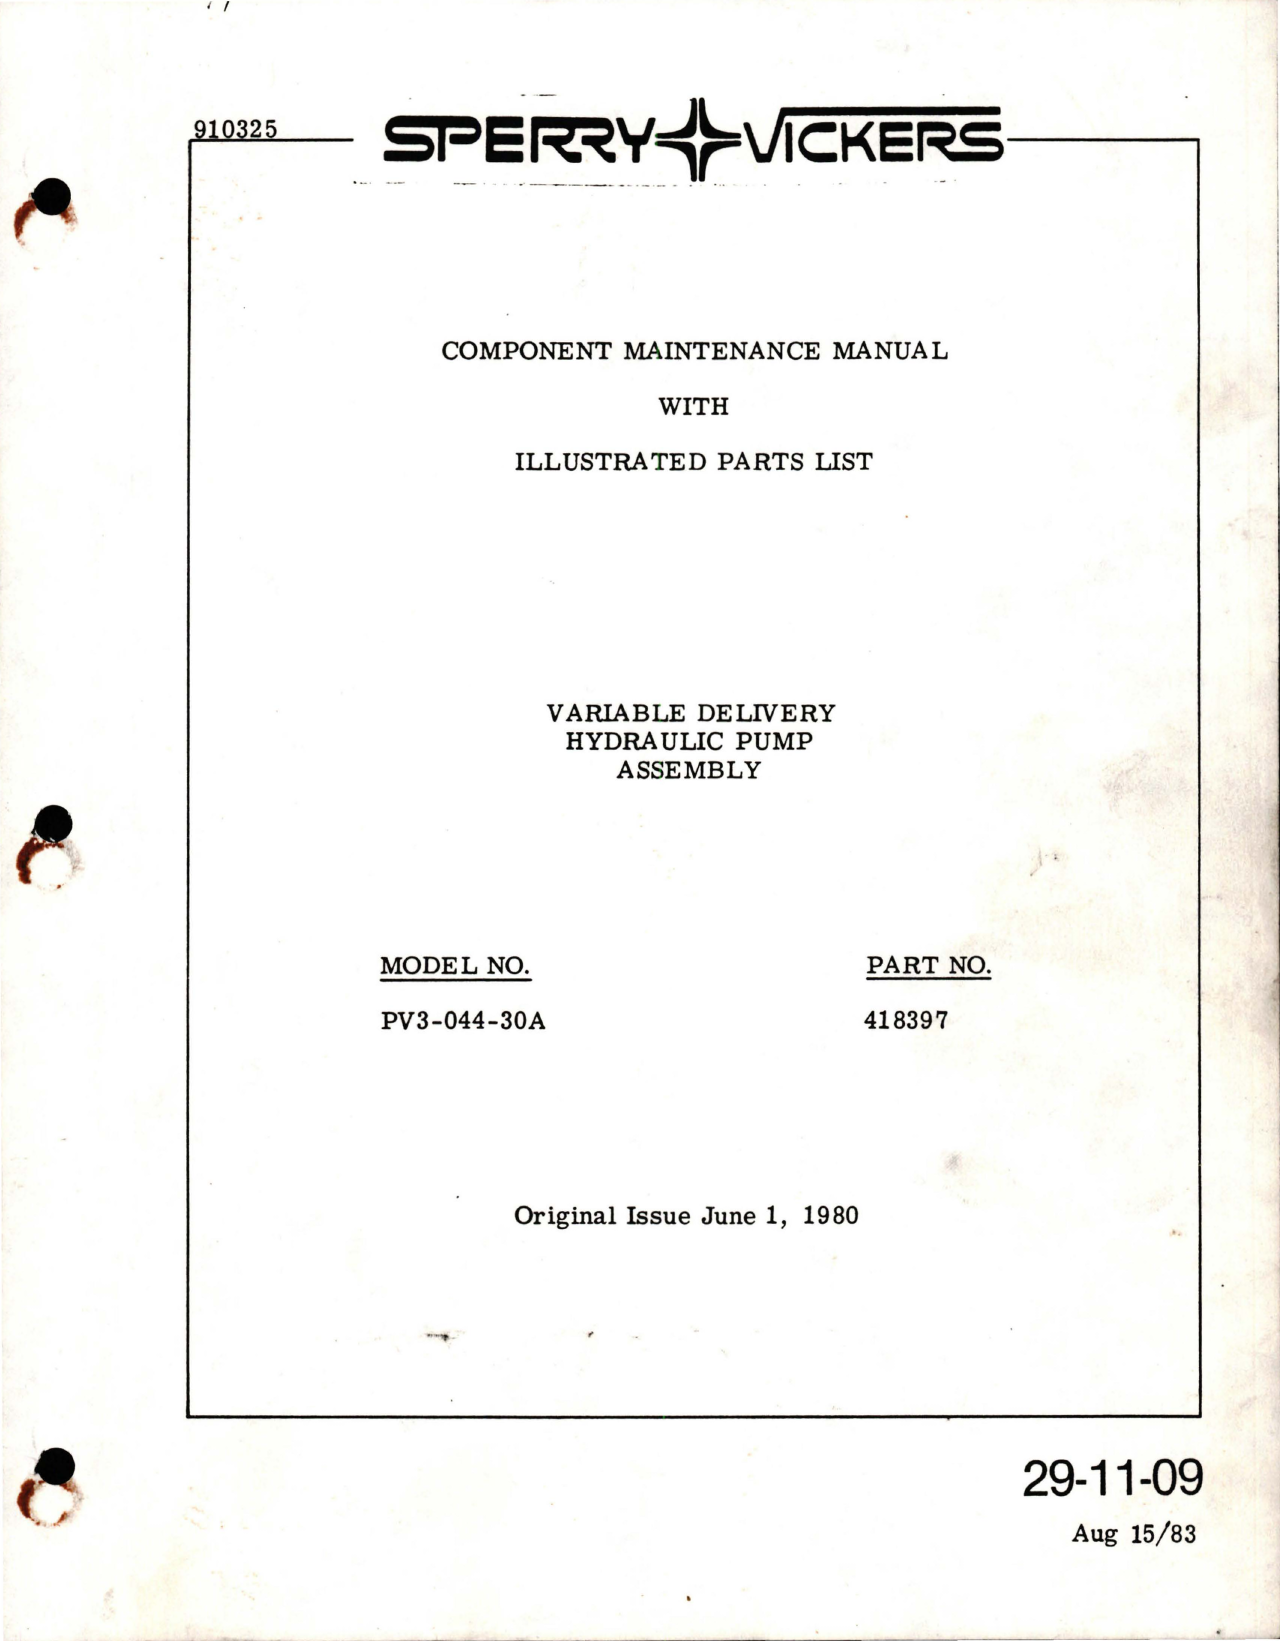 Sample page 1 from AirCorps Library document: Maintenance Manual with Parts List for Variable Delivery Hydraulic Pump Assembly - Model PV3-044-30A - Part 418397 